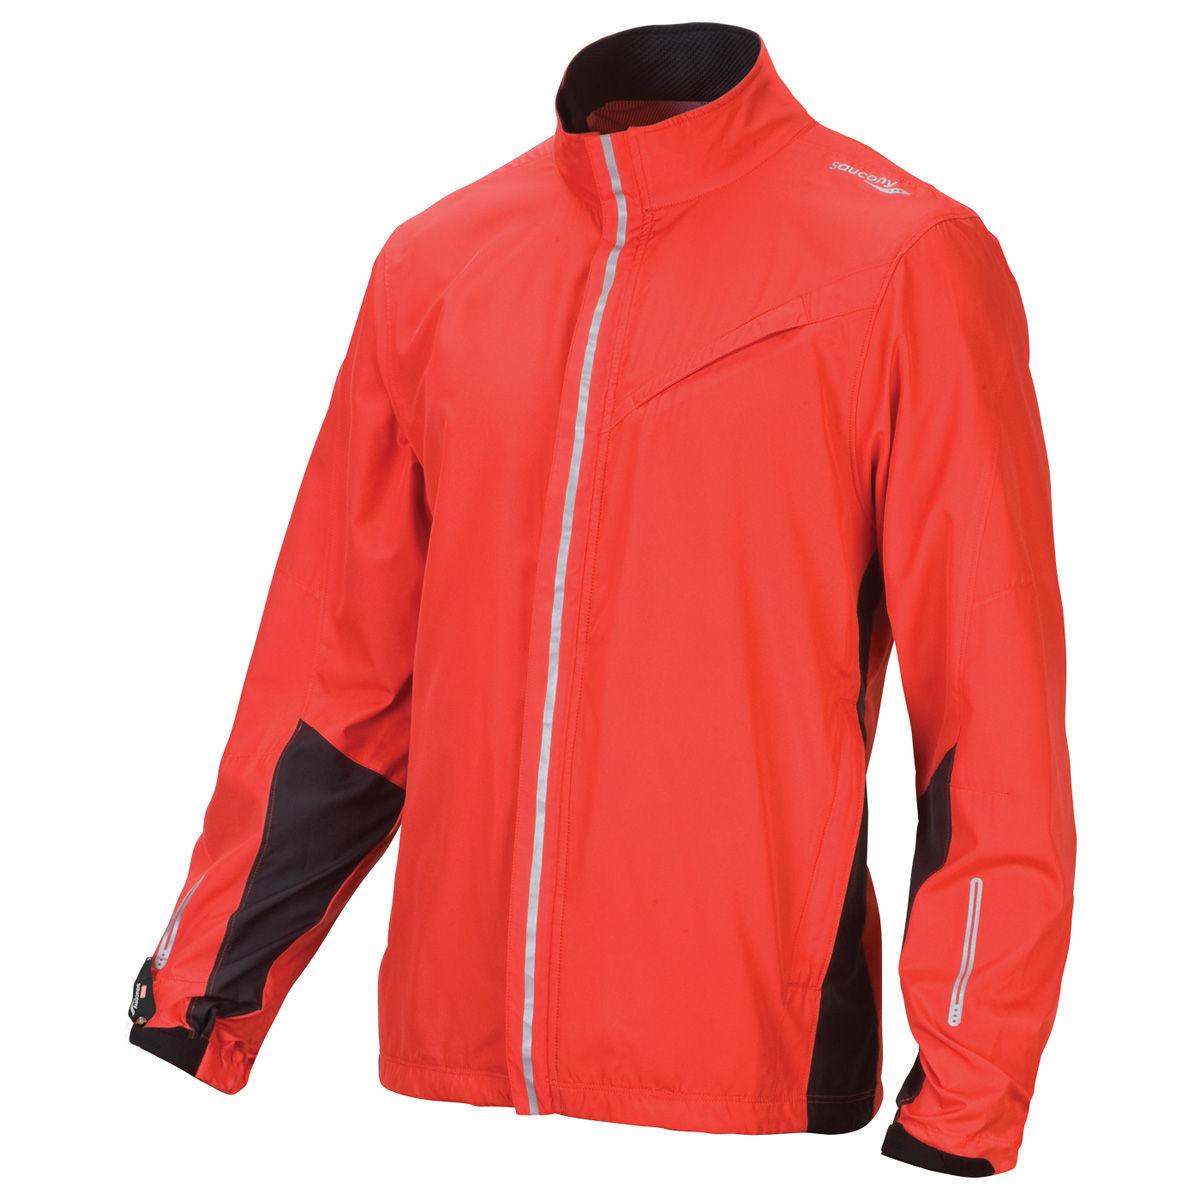 Foto Chaqueta Saucony - Sonic HDX - Large Strong Red/Black foto 341264